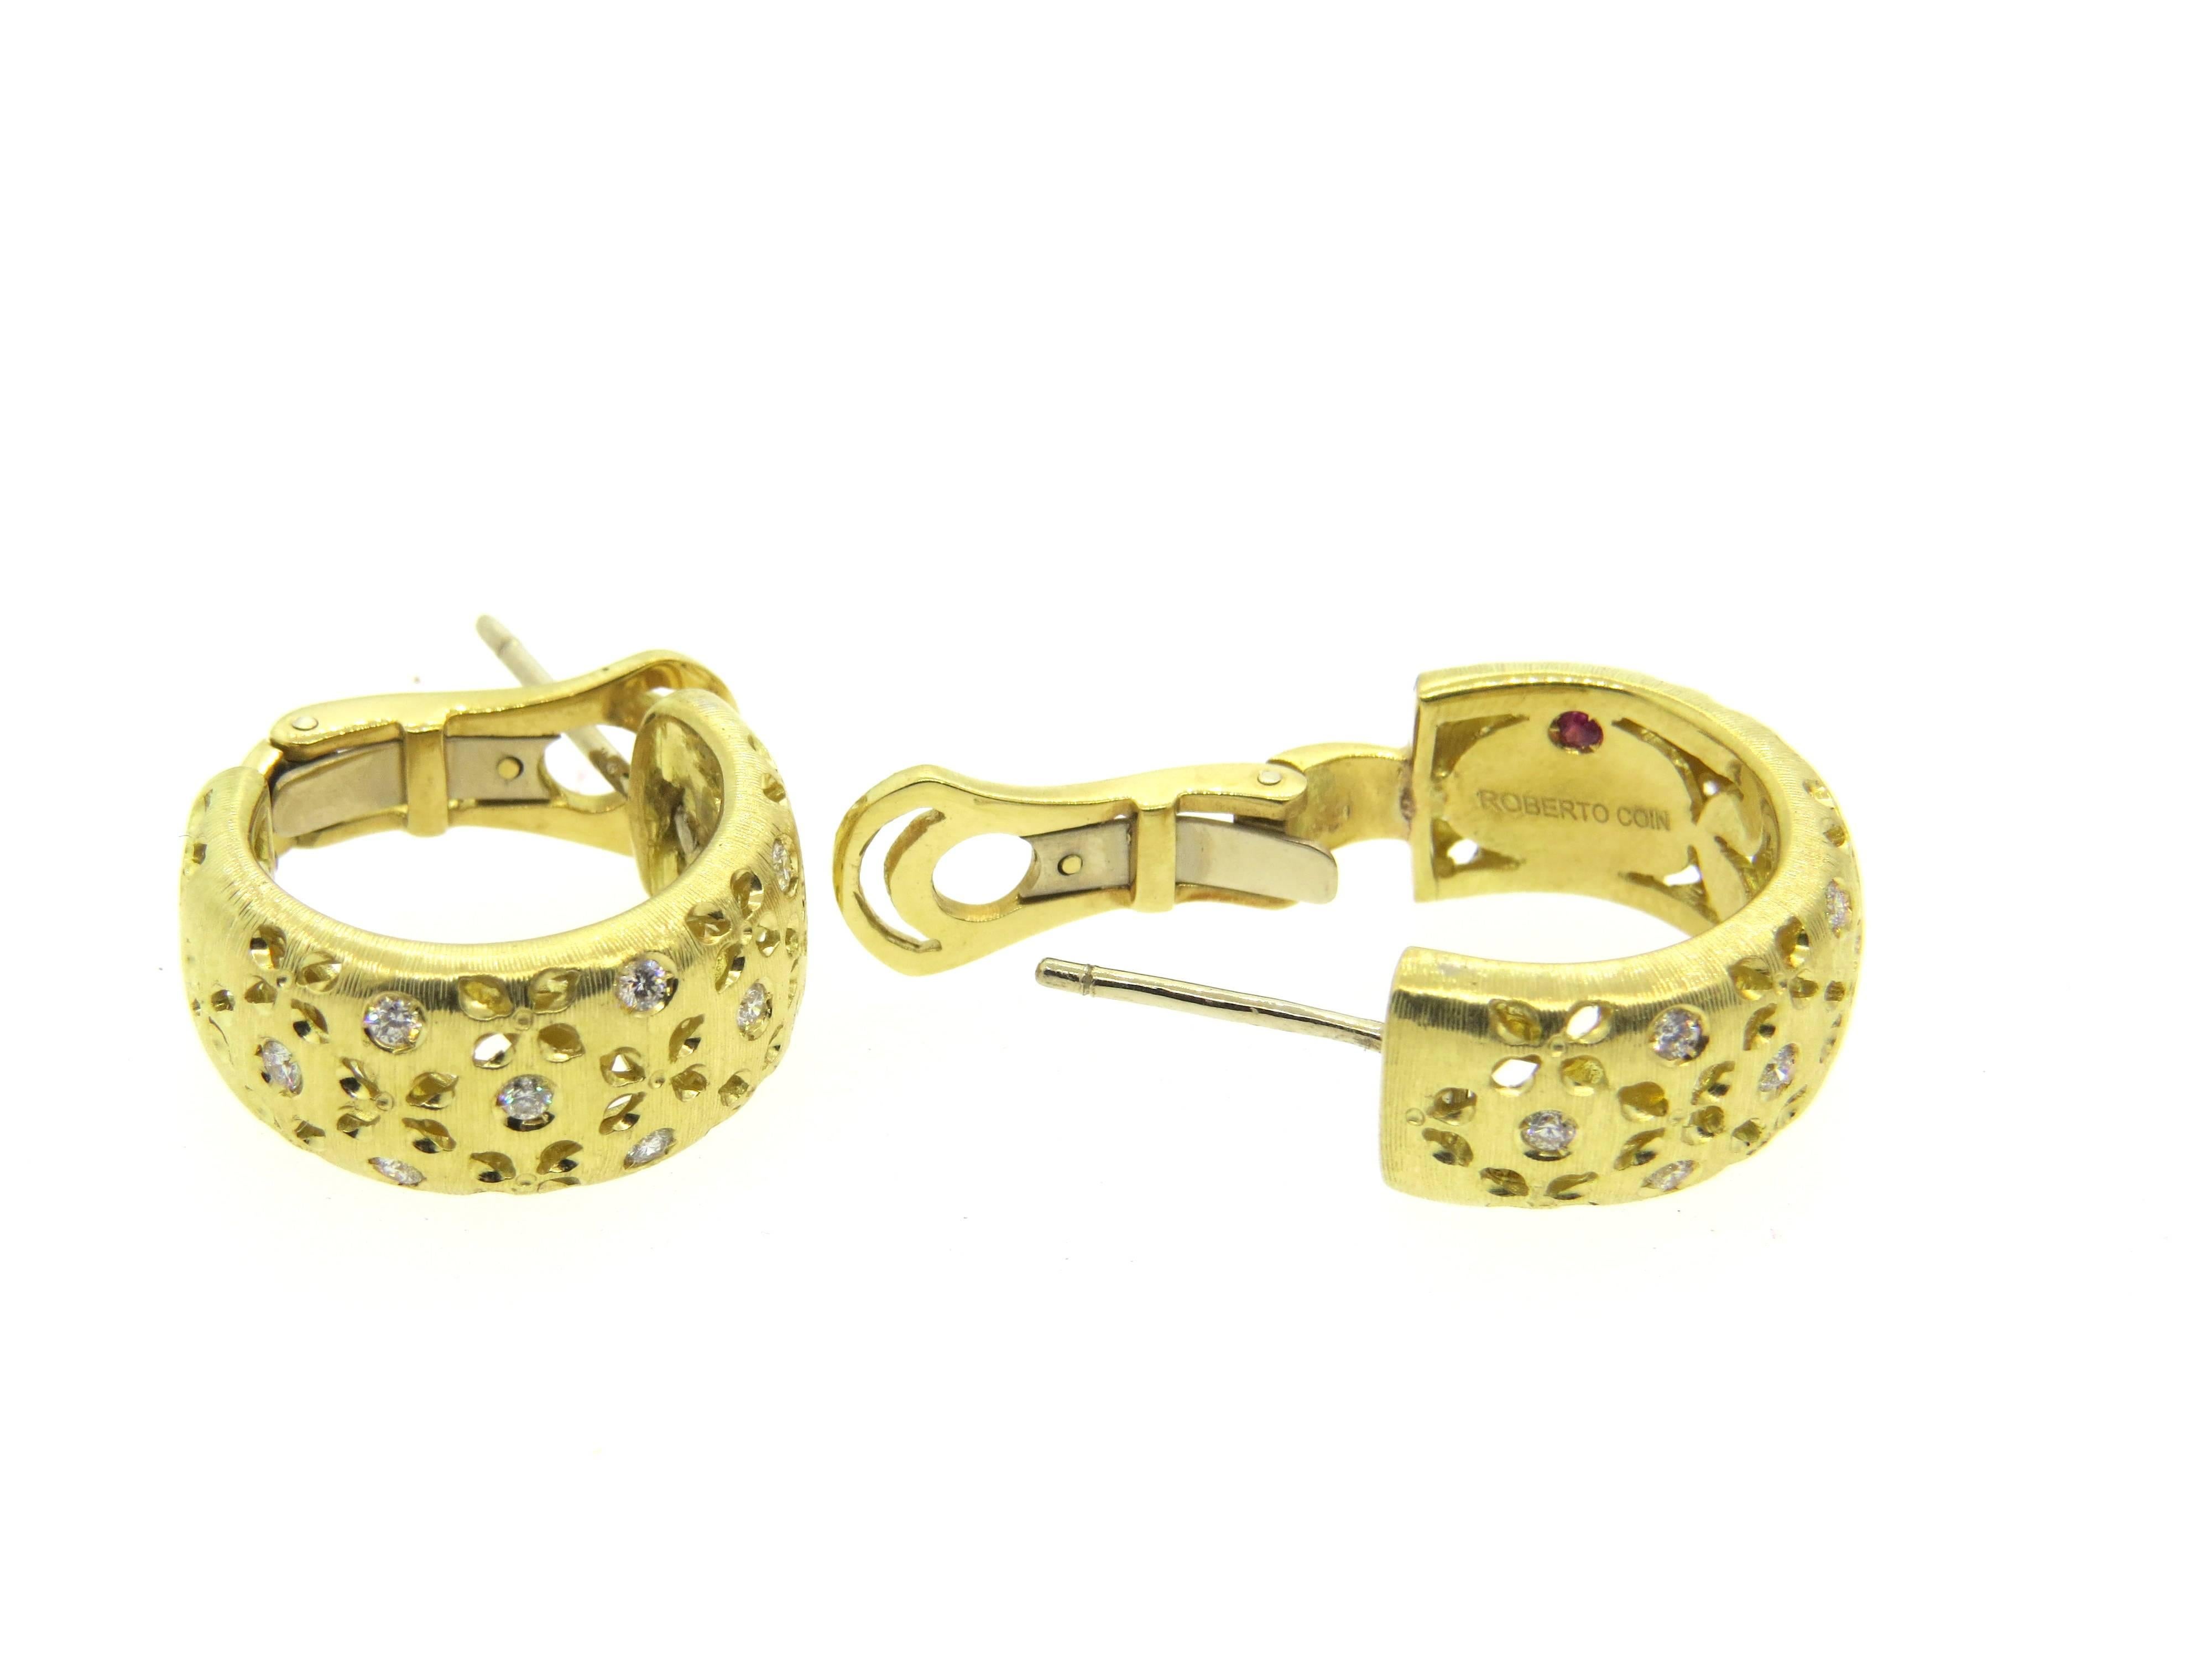 18k yellow gold hoop earrings, crafted by Roberto Coin for Granada collection, featuring approximately 0.50ctw in G/VS diamonds. Earrings are 22mm in diameter x 10mm wide. Marked Roberto Coin, with signature ruby, 18Kt, Italy, 1226VI. Weight - 19.1